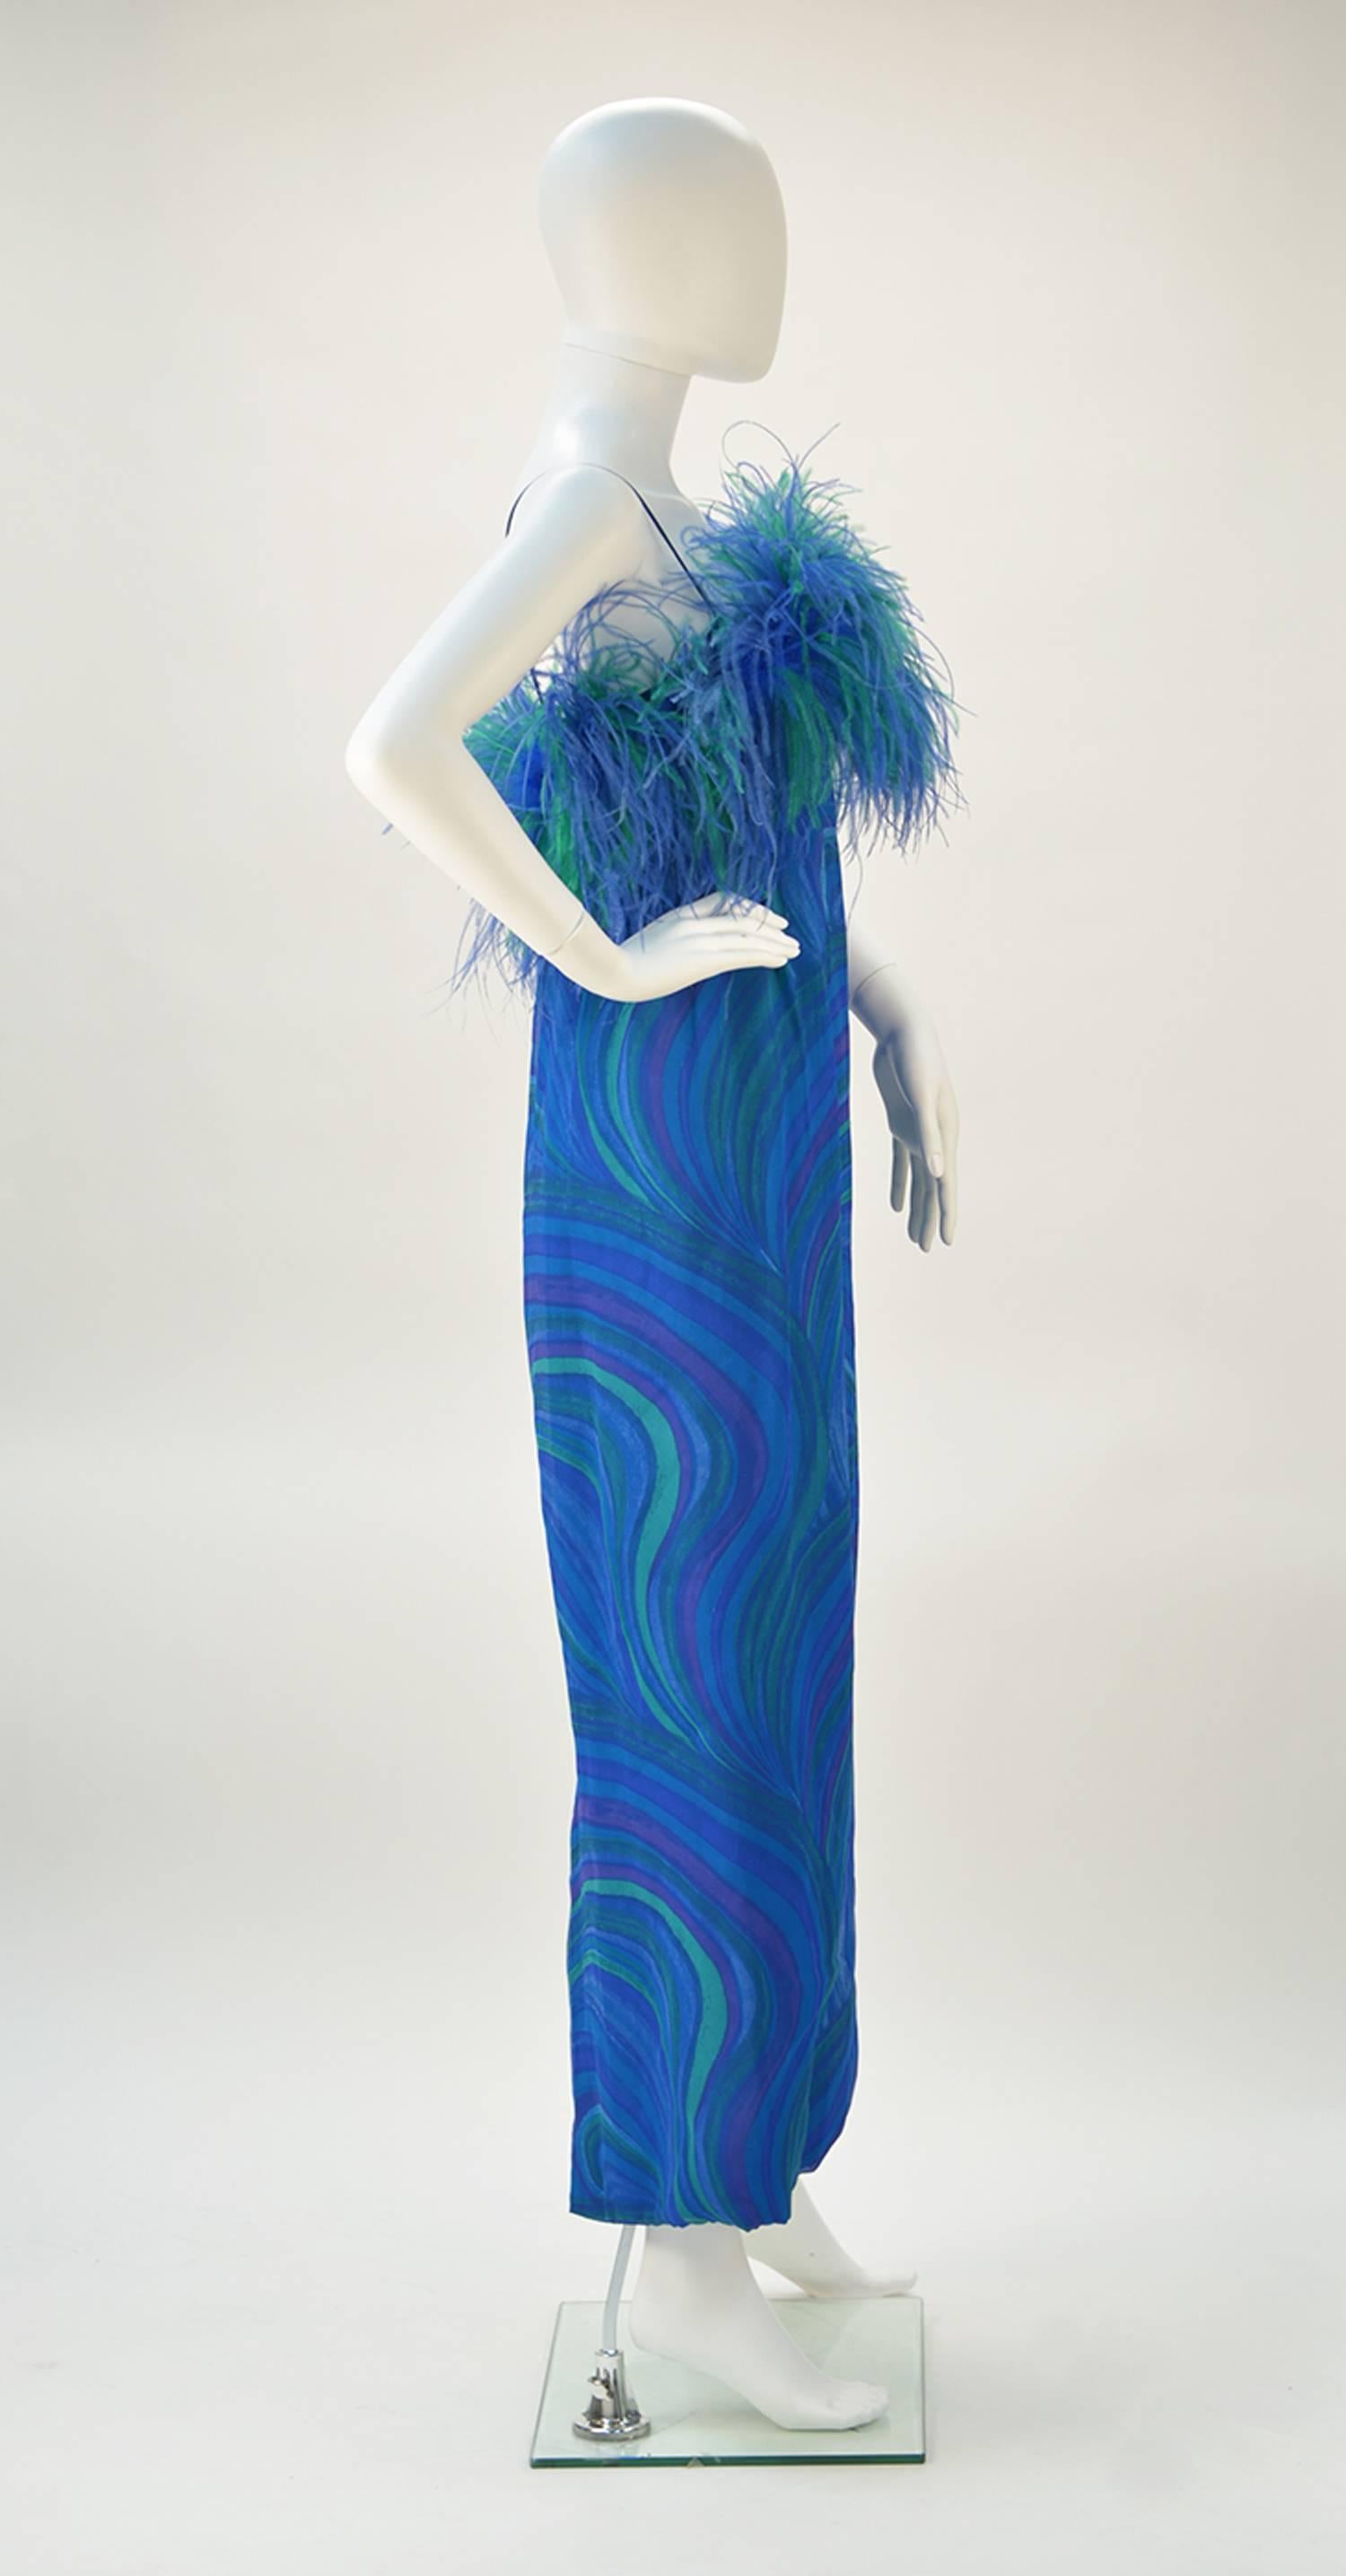 Vintage 1963-1974 fun and fantastic any festive occasion comes this refined yet groovy blue-green swirl maxi length (if you are 5'4